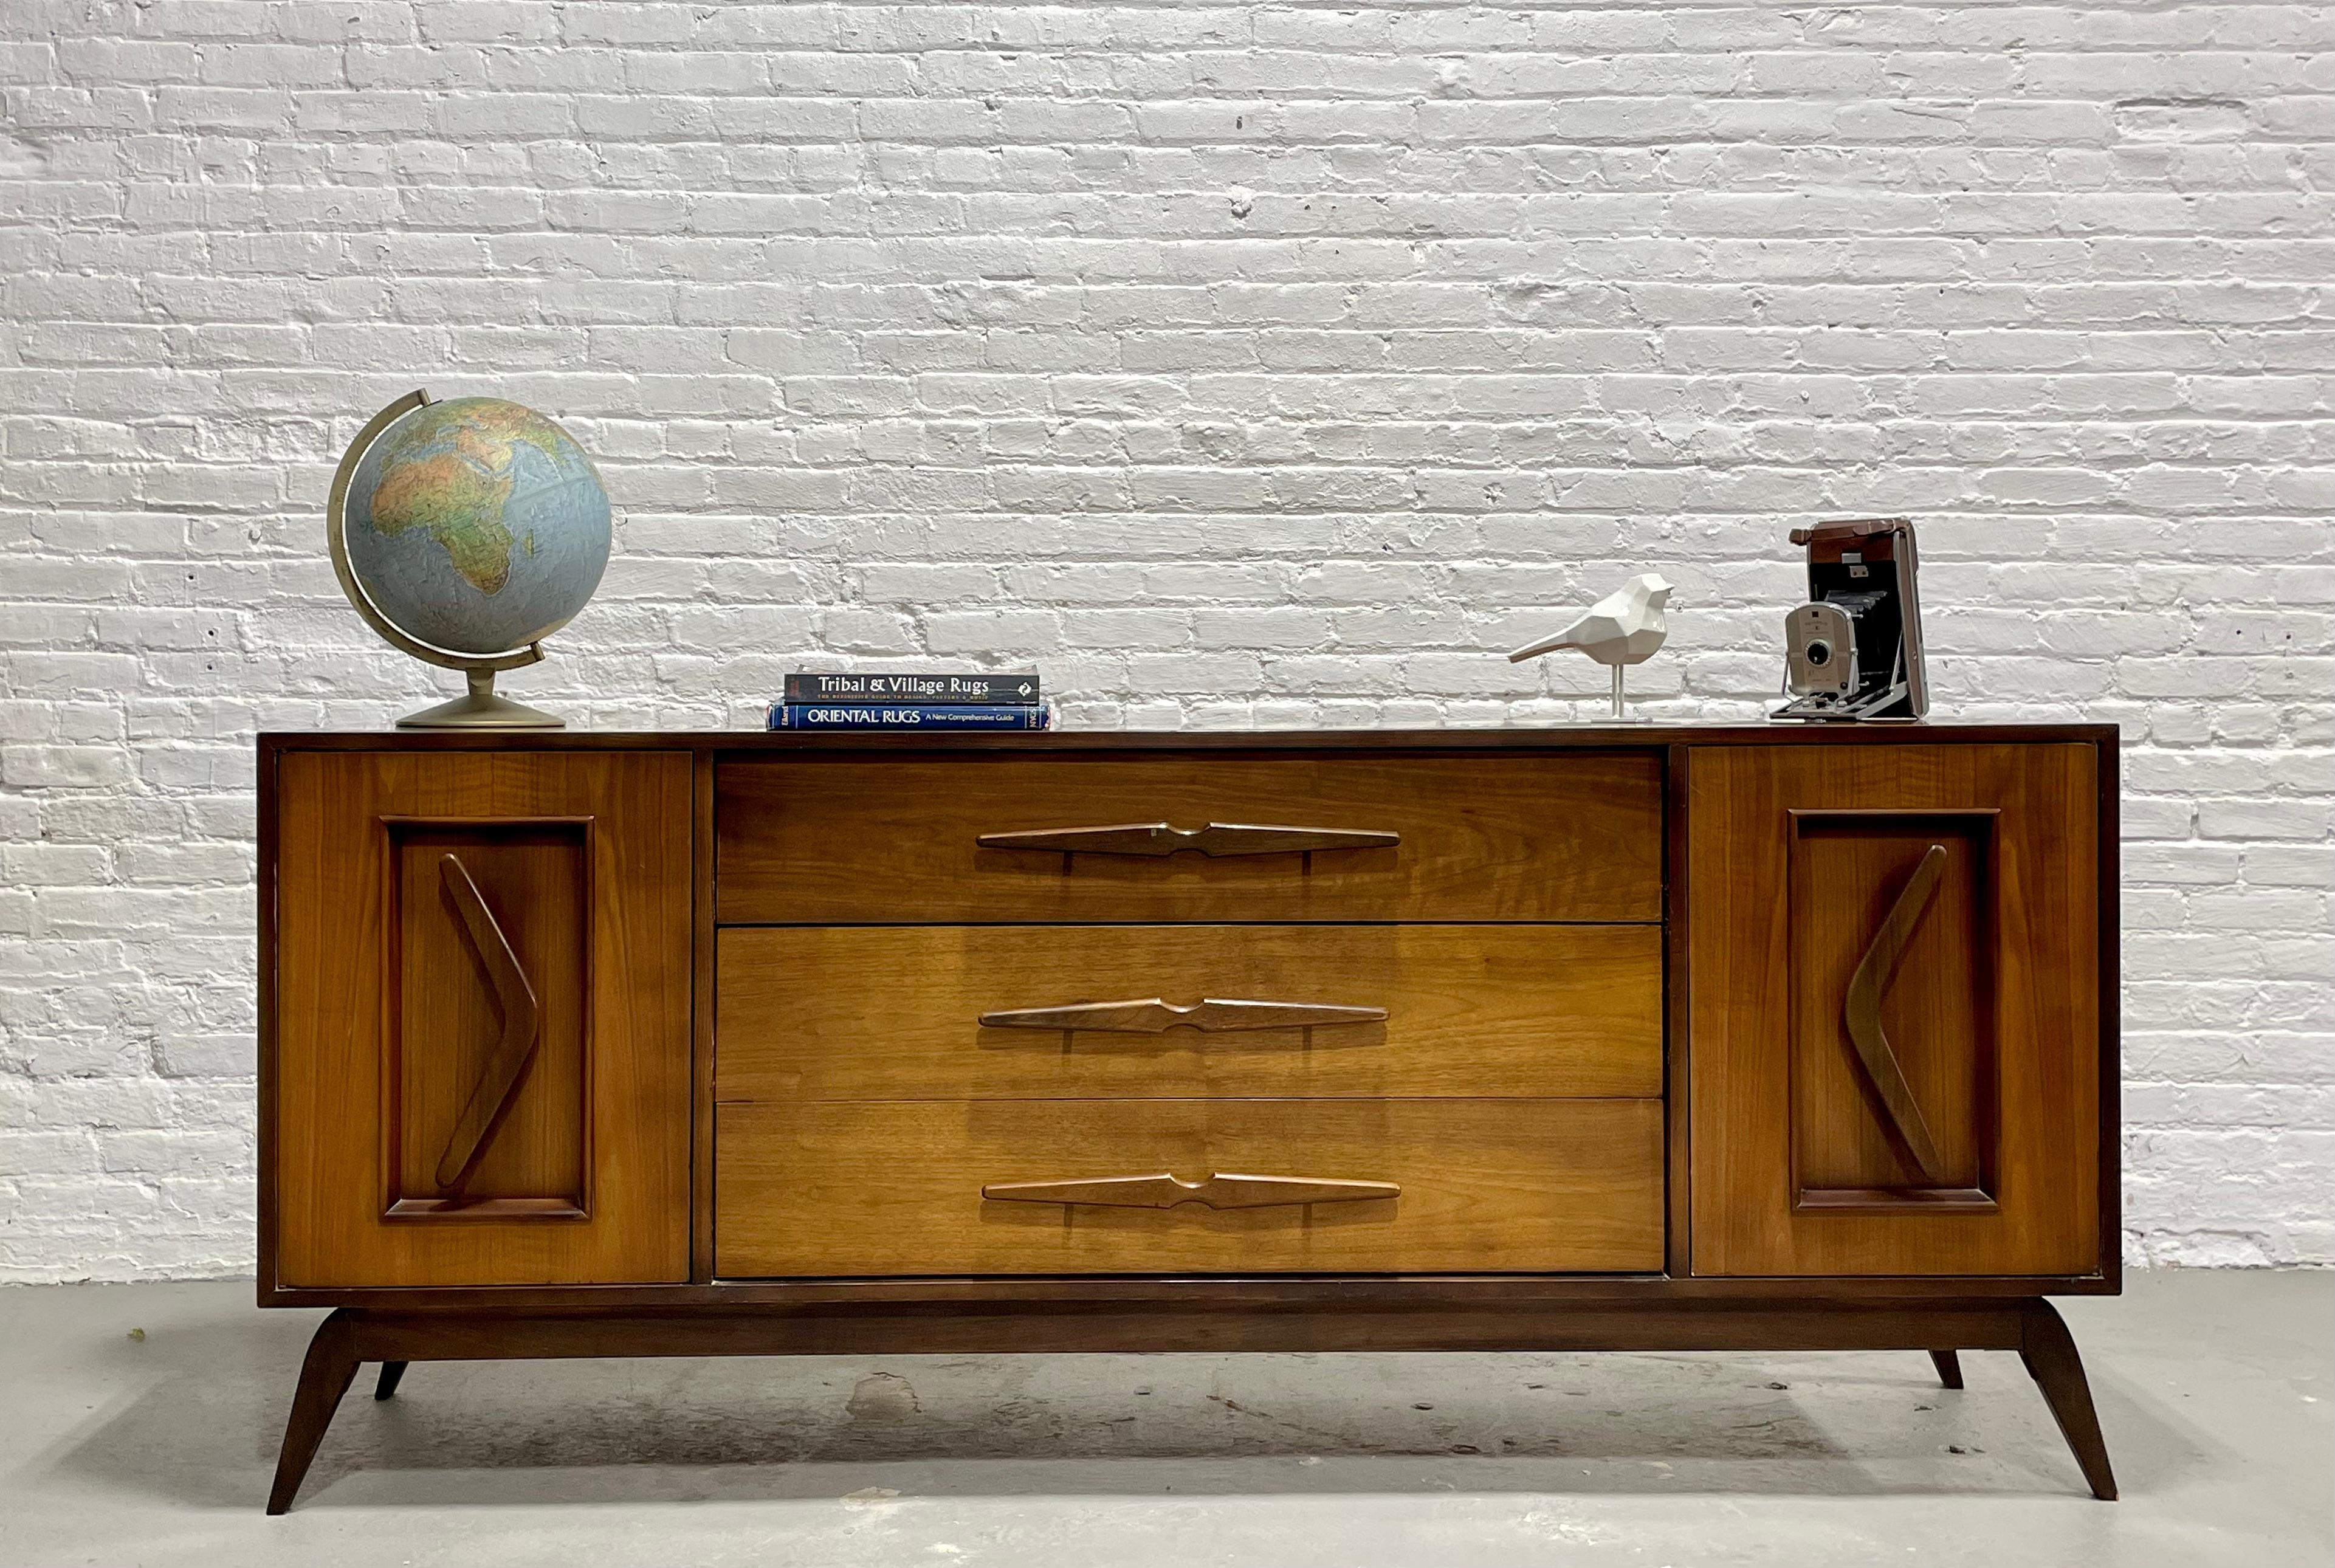 Mid-Century Modern Bedroom Set - Long Dresser / Sideboard + Nightstands, circa 1960s.

Mid-Century Modern Long Dresser / Sideboard with boomerang hand-pulls along the side cabinet doors, sculpted center pulls and splayed legs along the solid base.